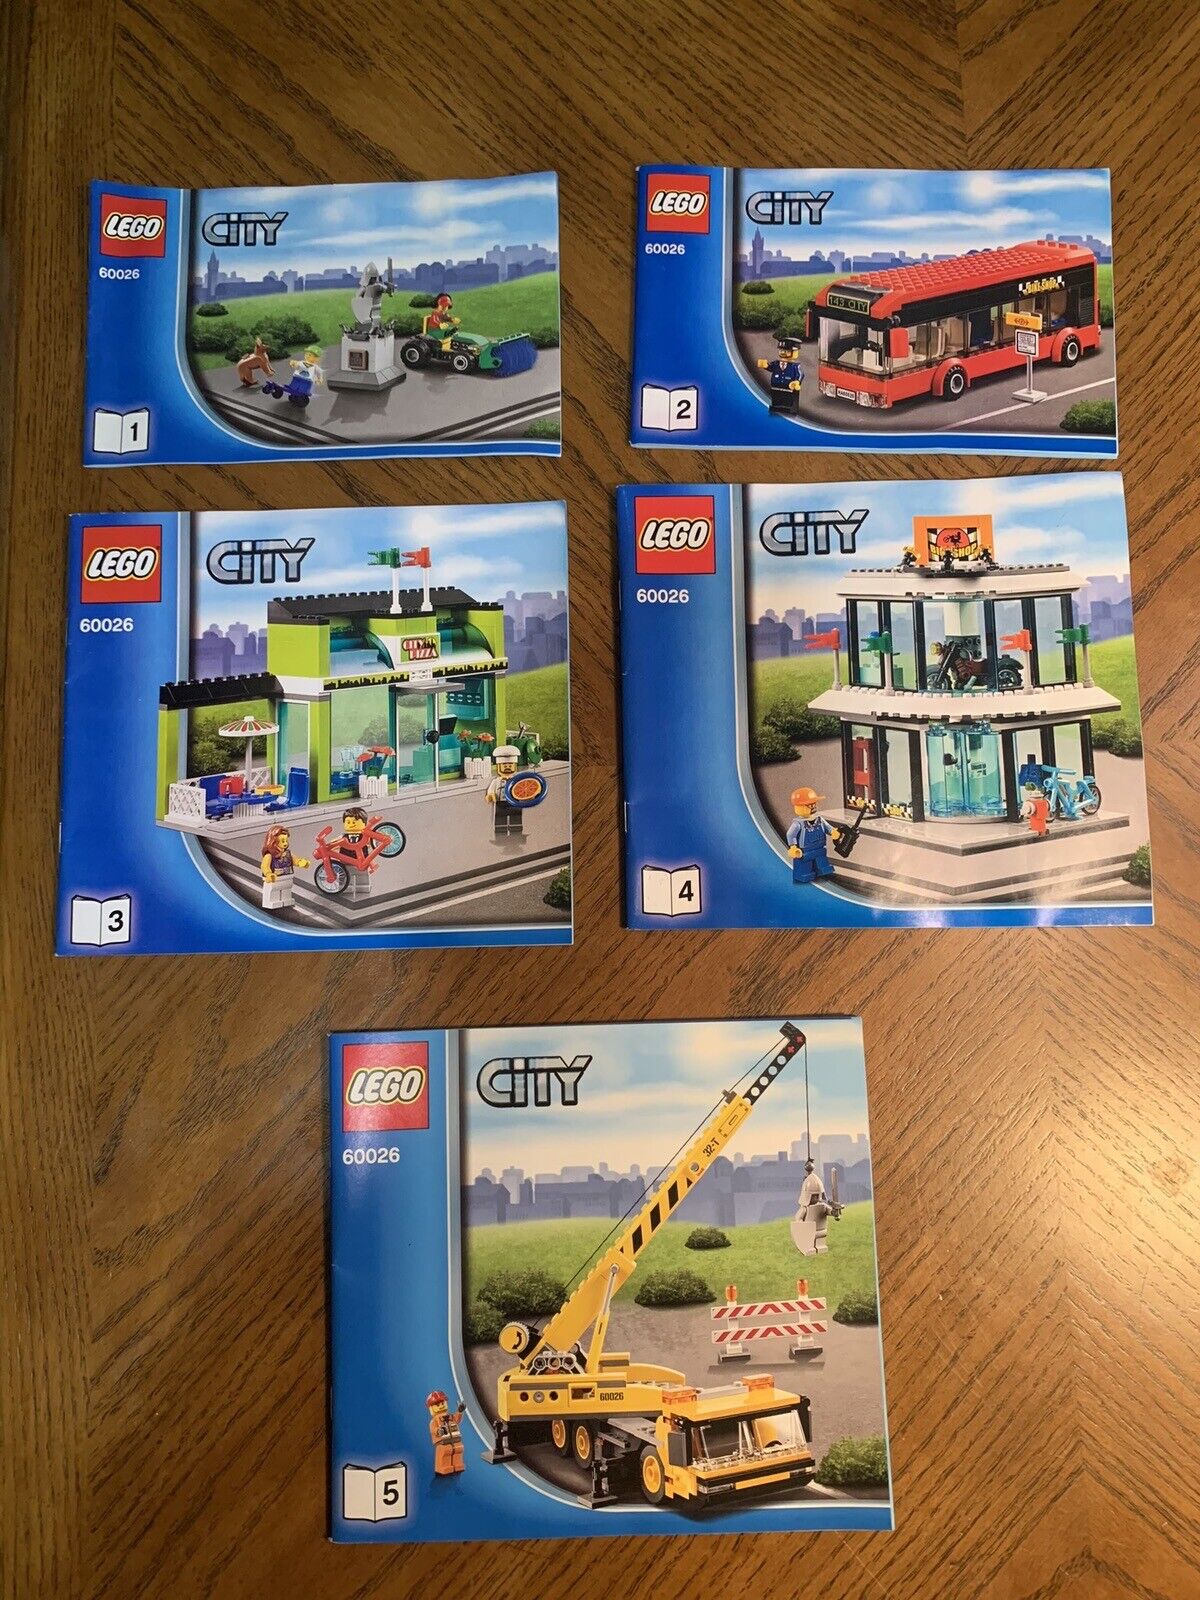 Lego City INSTRUCTION MANUAL ONLY for Set 60026 Town Square 1-5 No Bricks/Parts